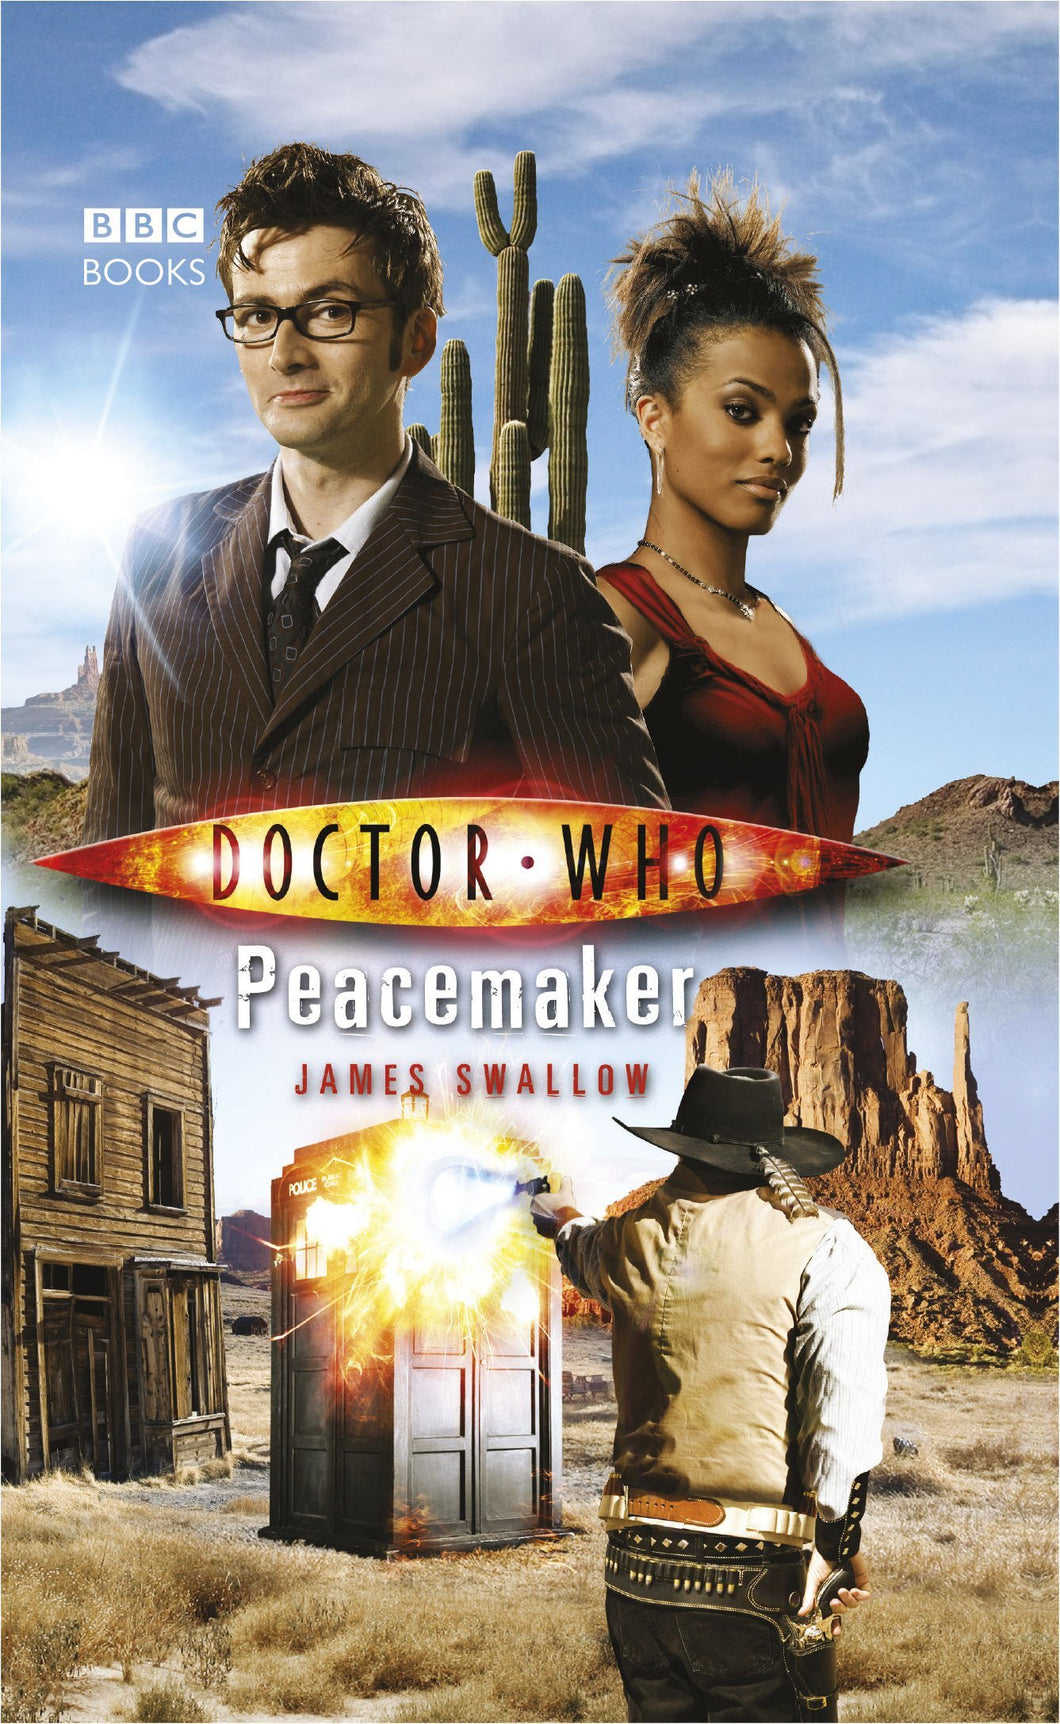 Doctor Who: Peacemaker - ONLINE SCHOOL BOOK FAIRS 